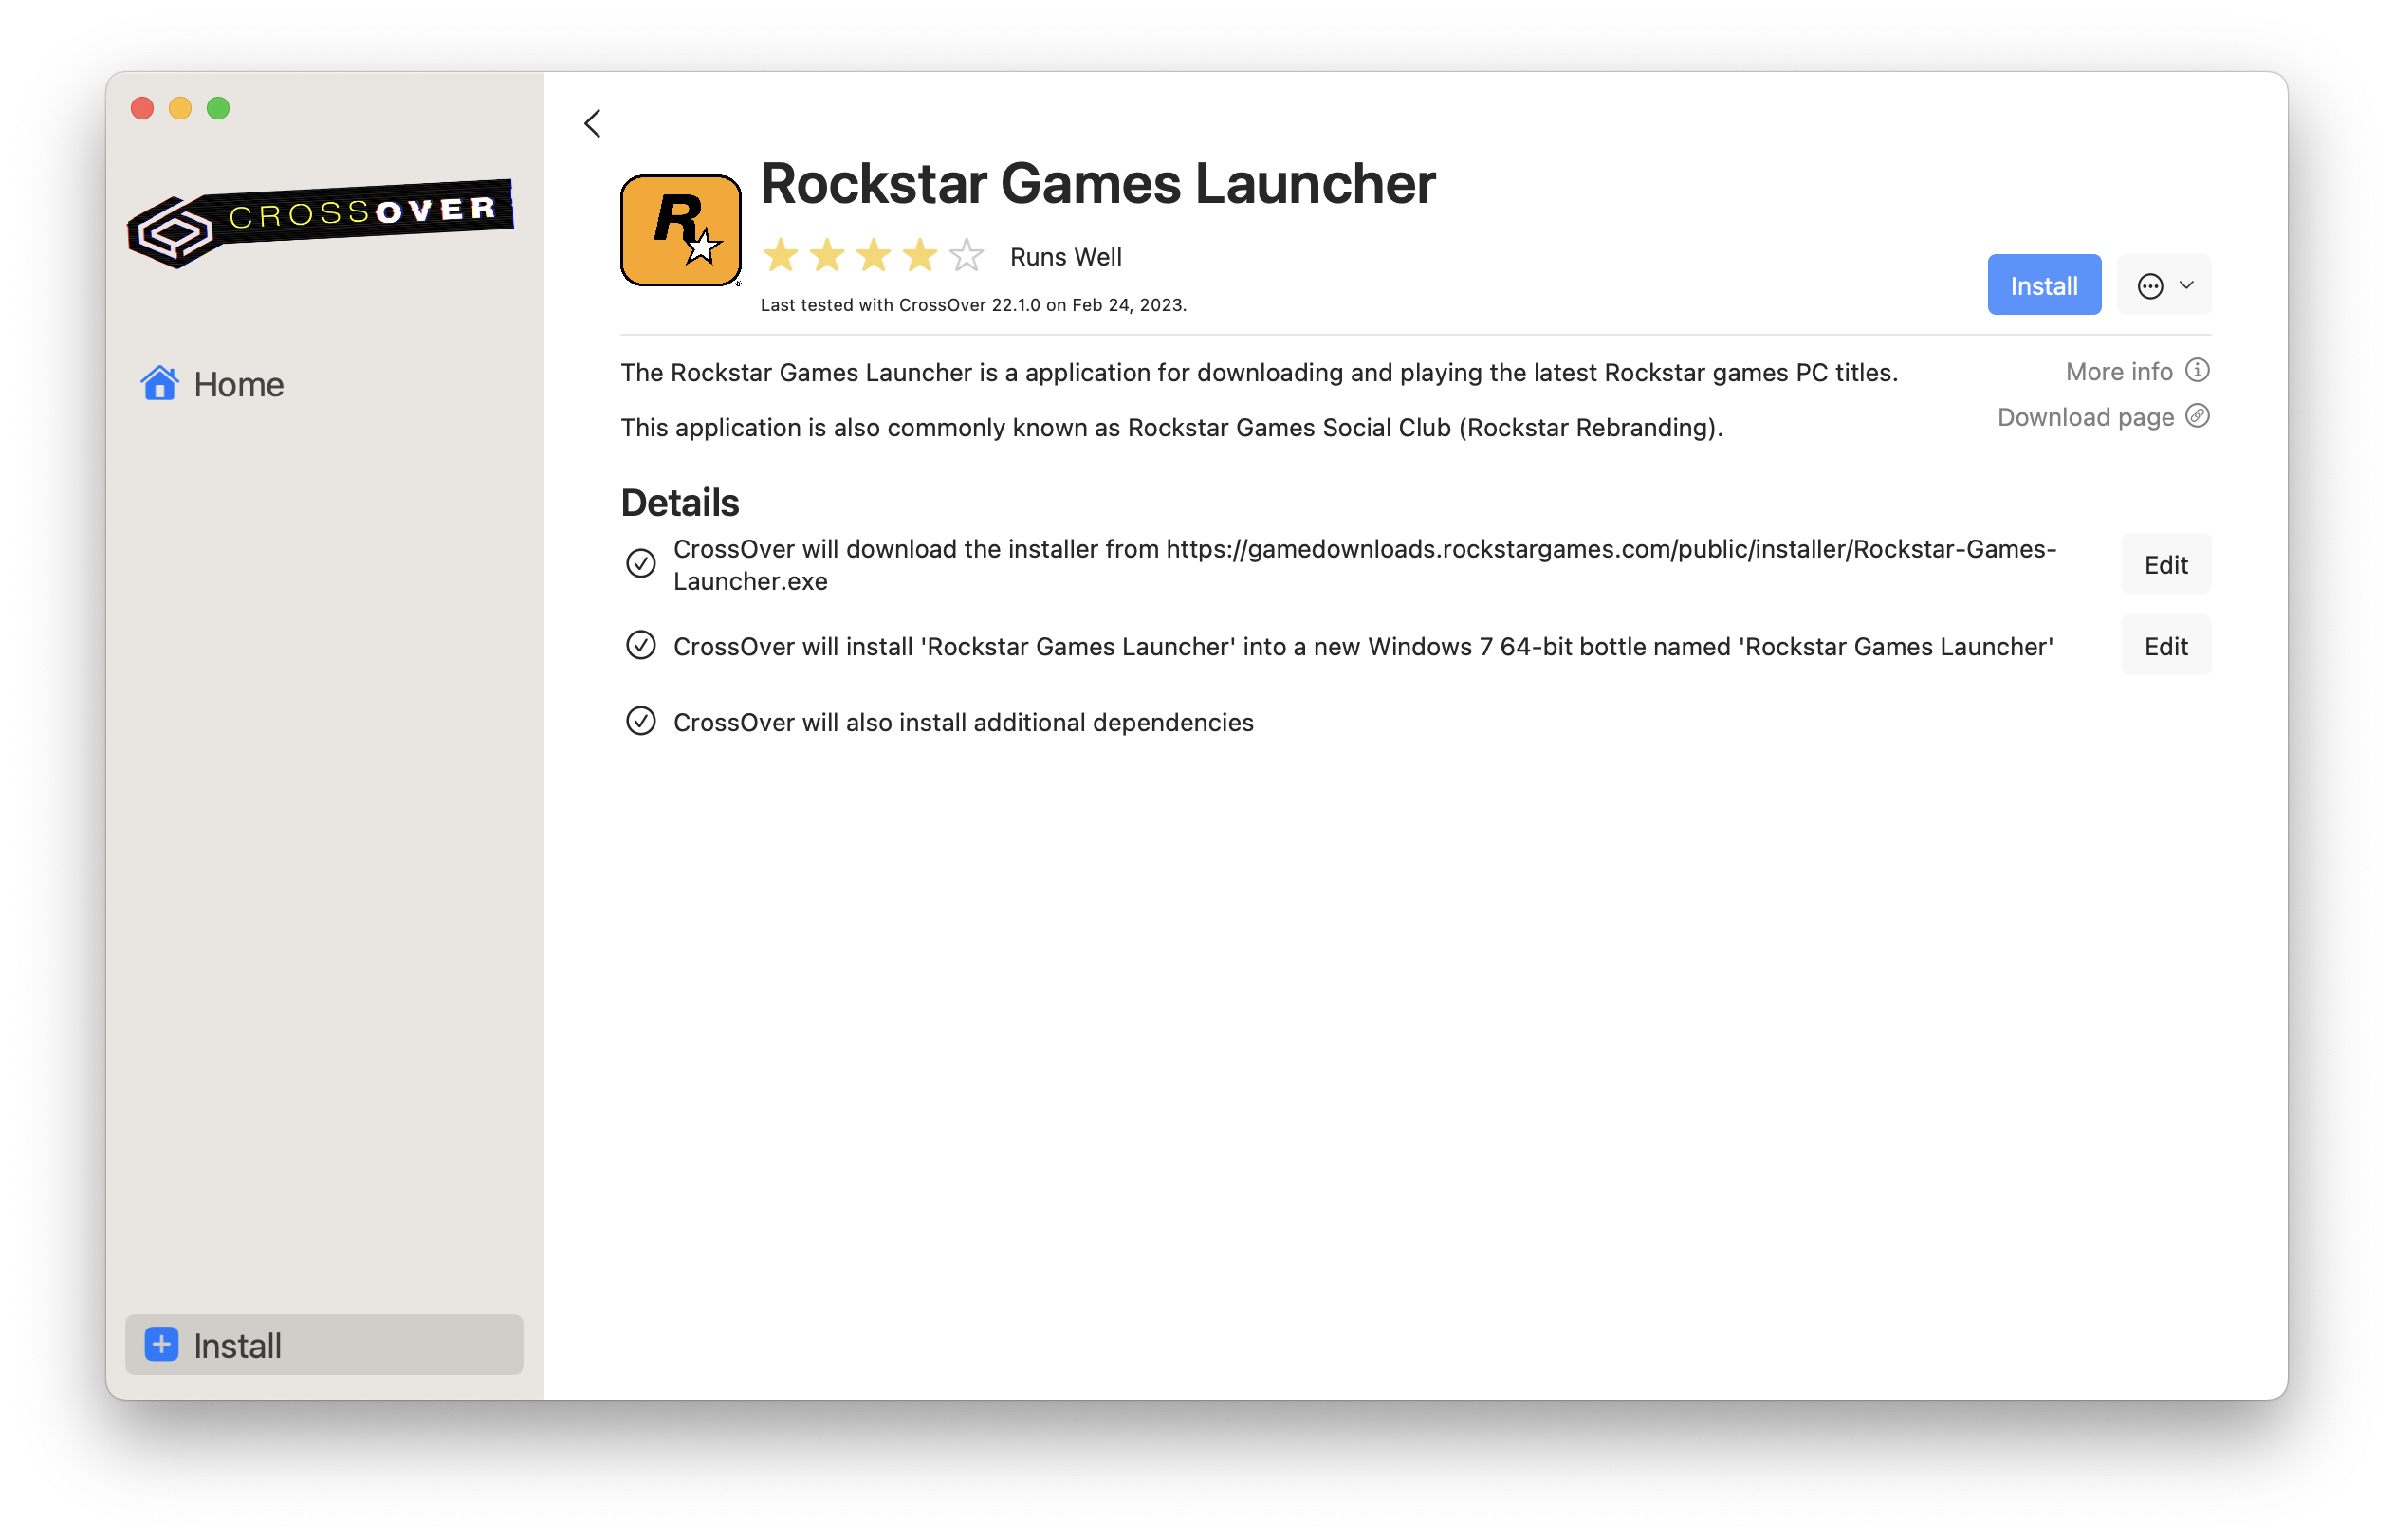 Need help! I can't click the login button of Rockstar game launcher